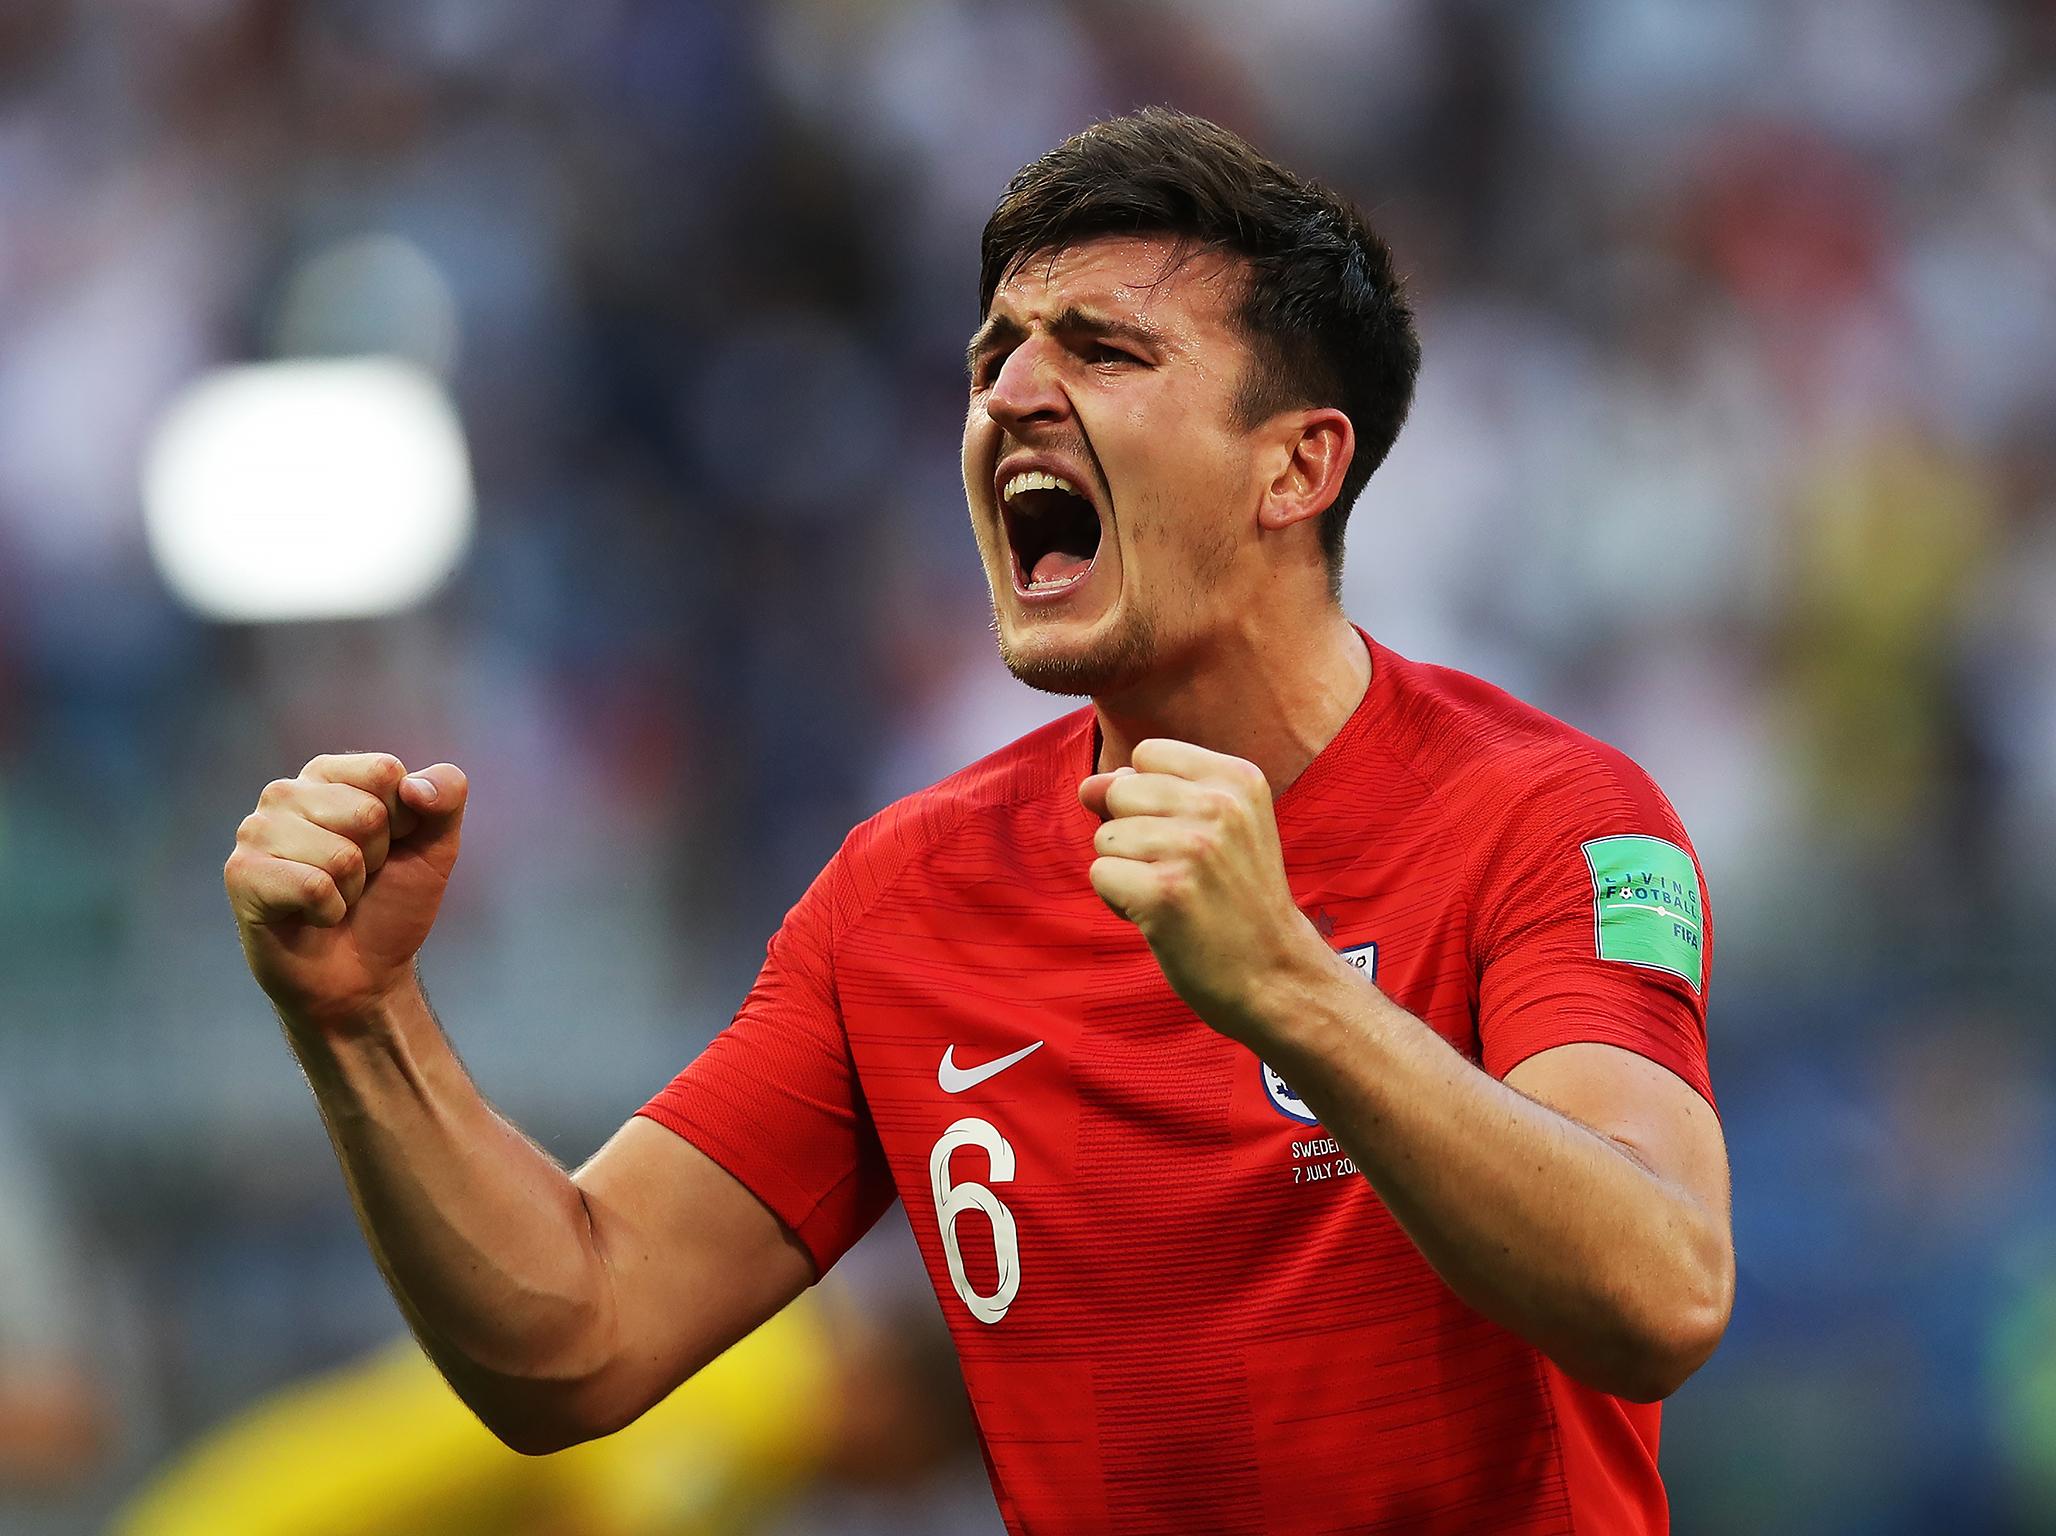 Transfer news, rumours - LIVE: Manchester United told Maguire price, Chelsea dealt blow over Juve star, Vida to Liverpool latest plus Arsenal, Spurs